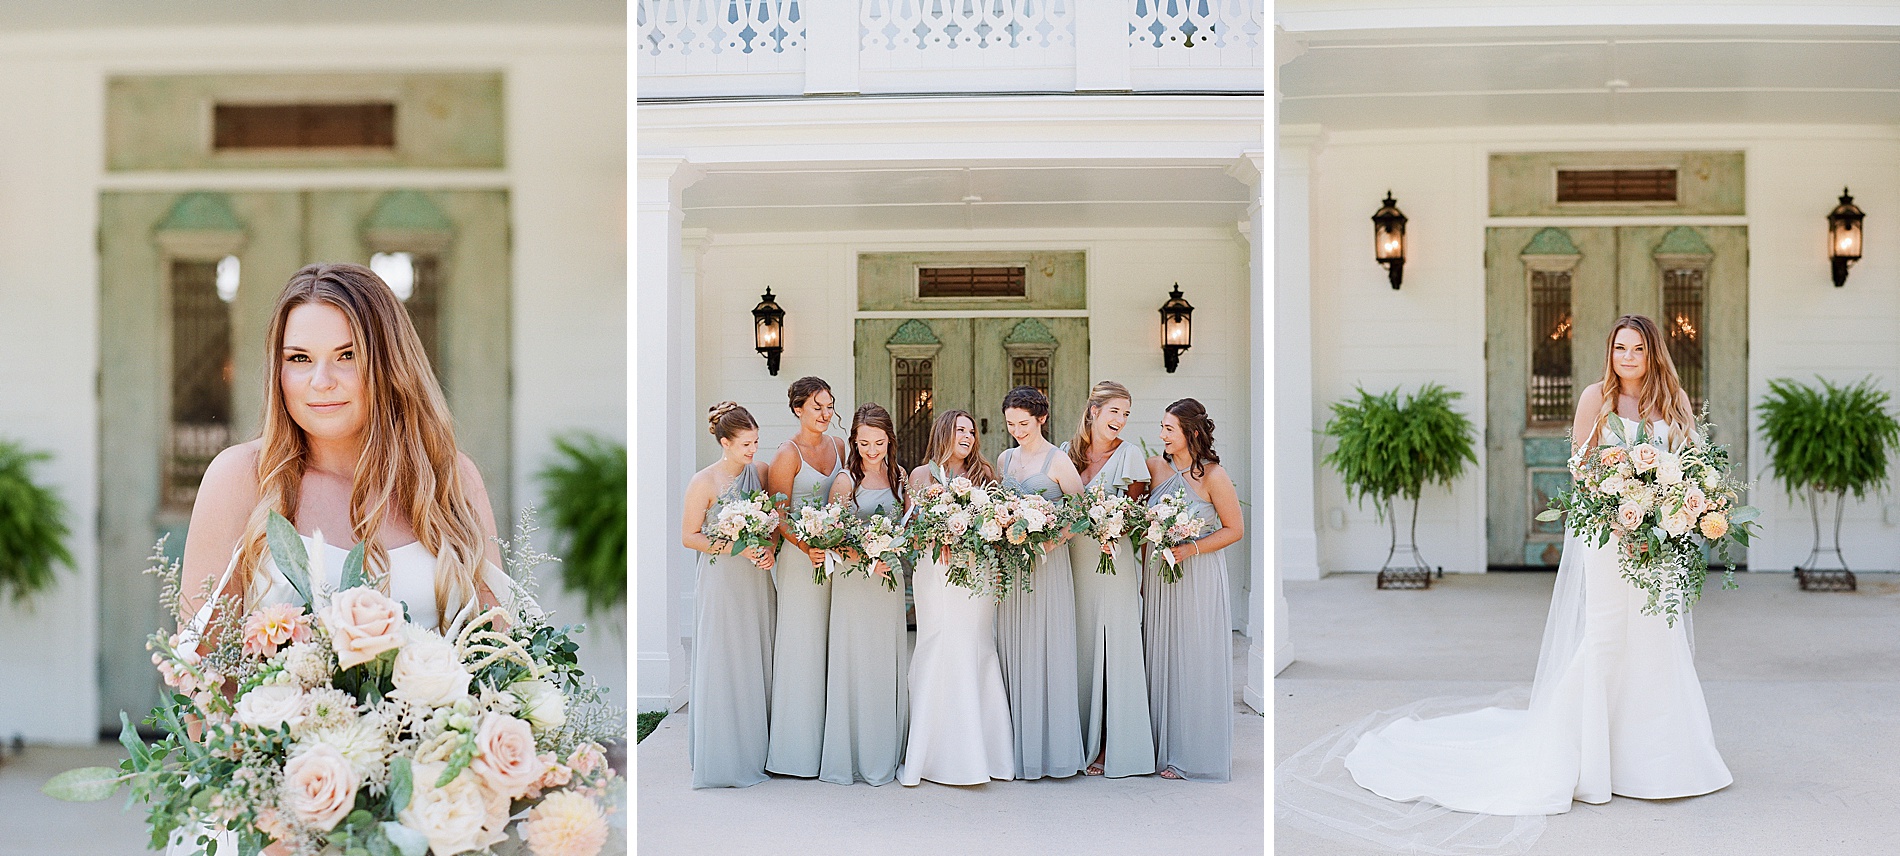 bridal portraits and bridesmaids from Southern Harvest Hollow Wedding